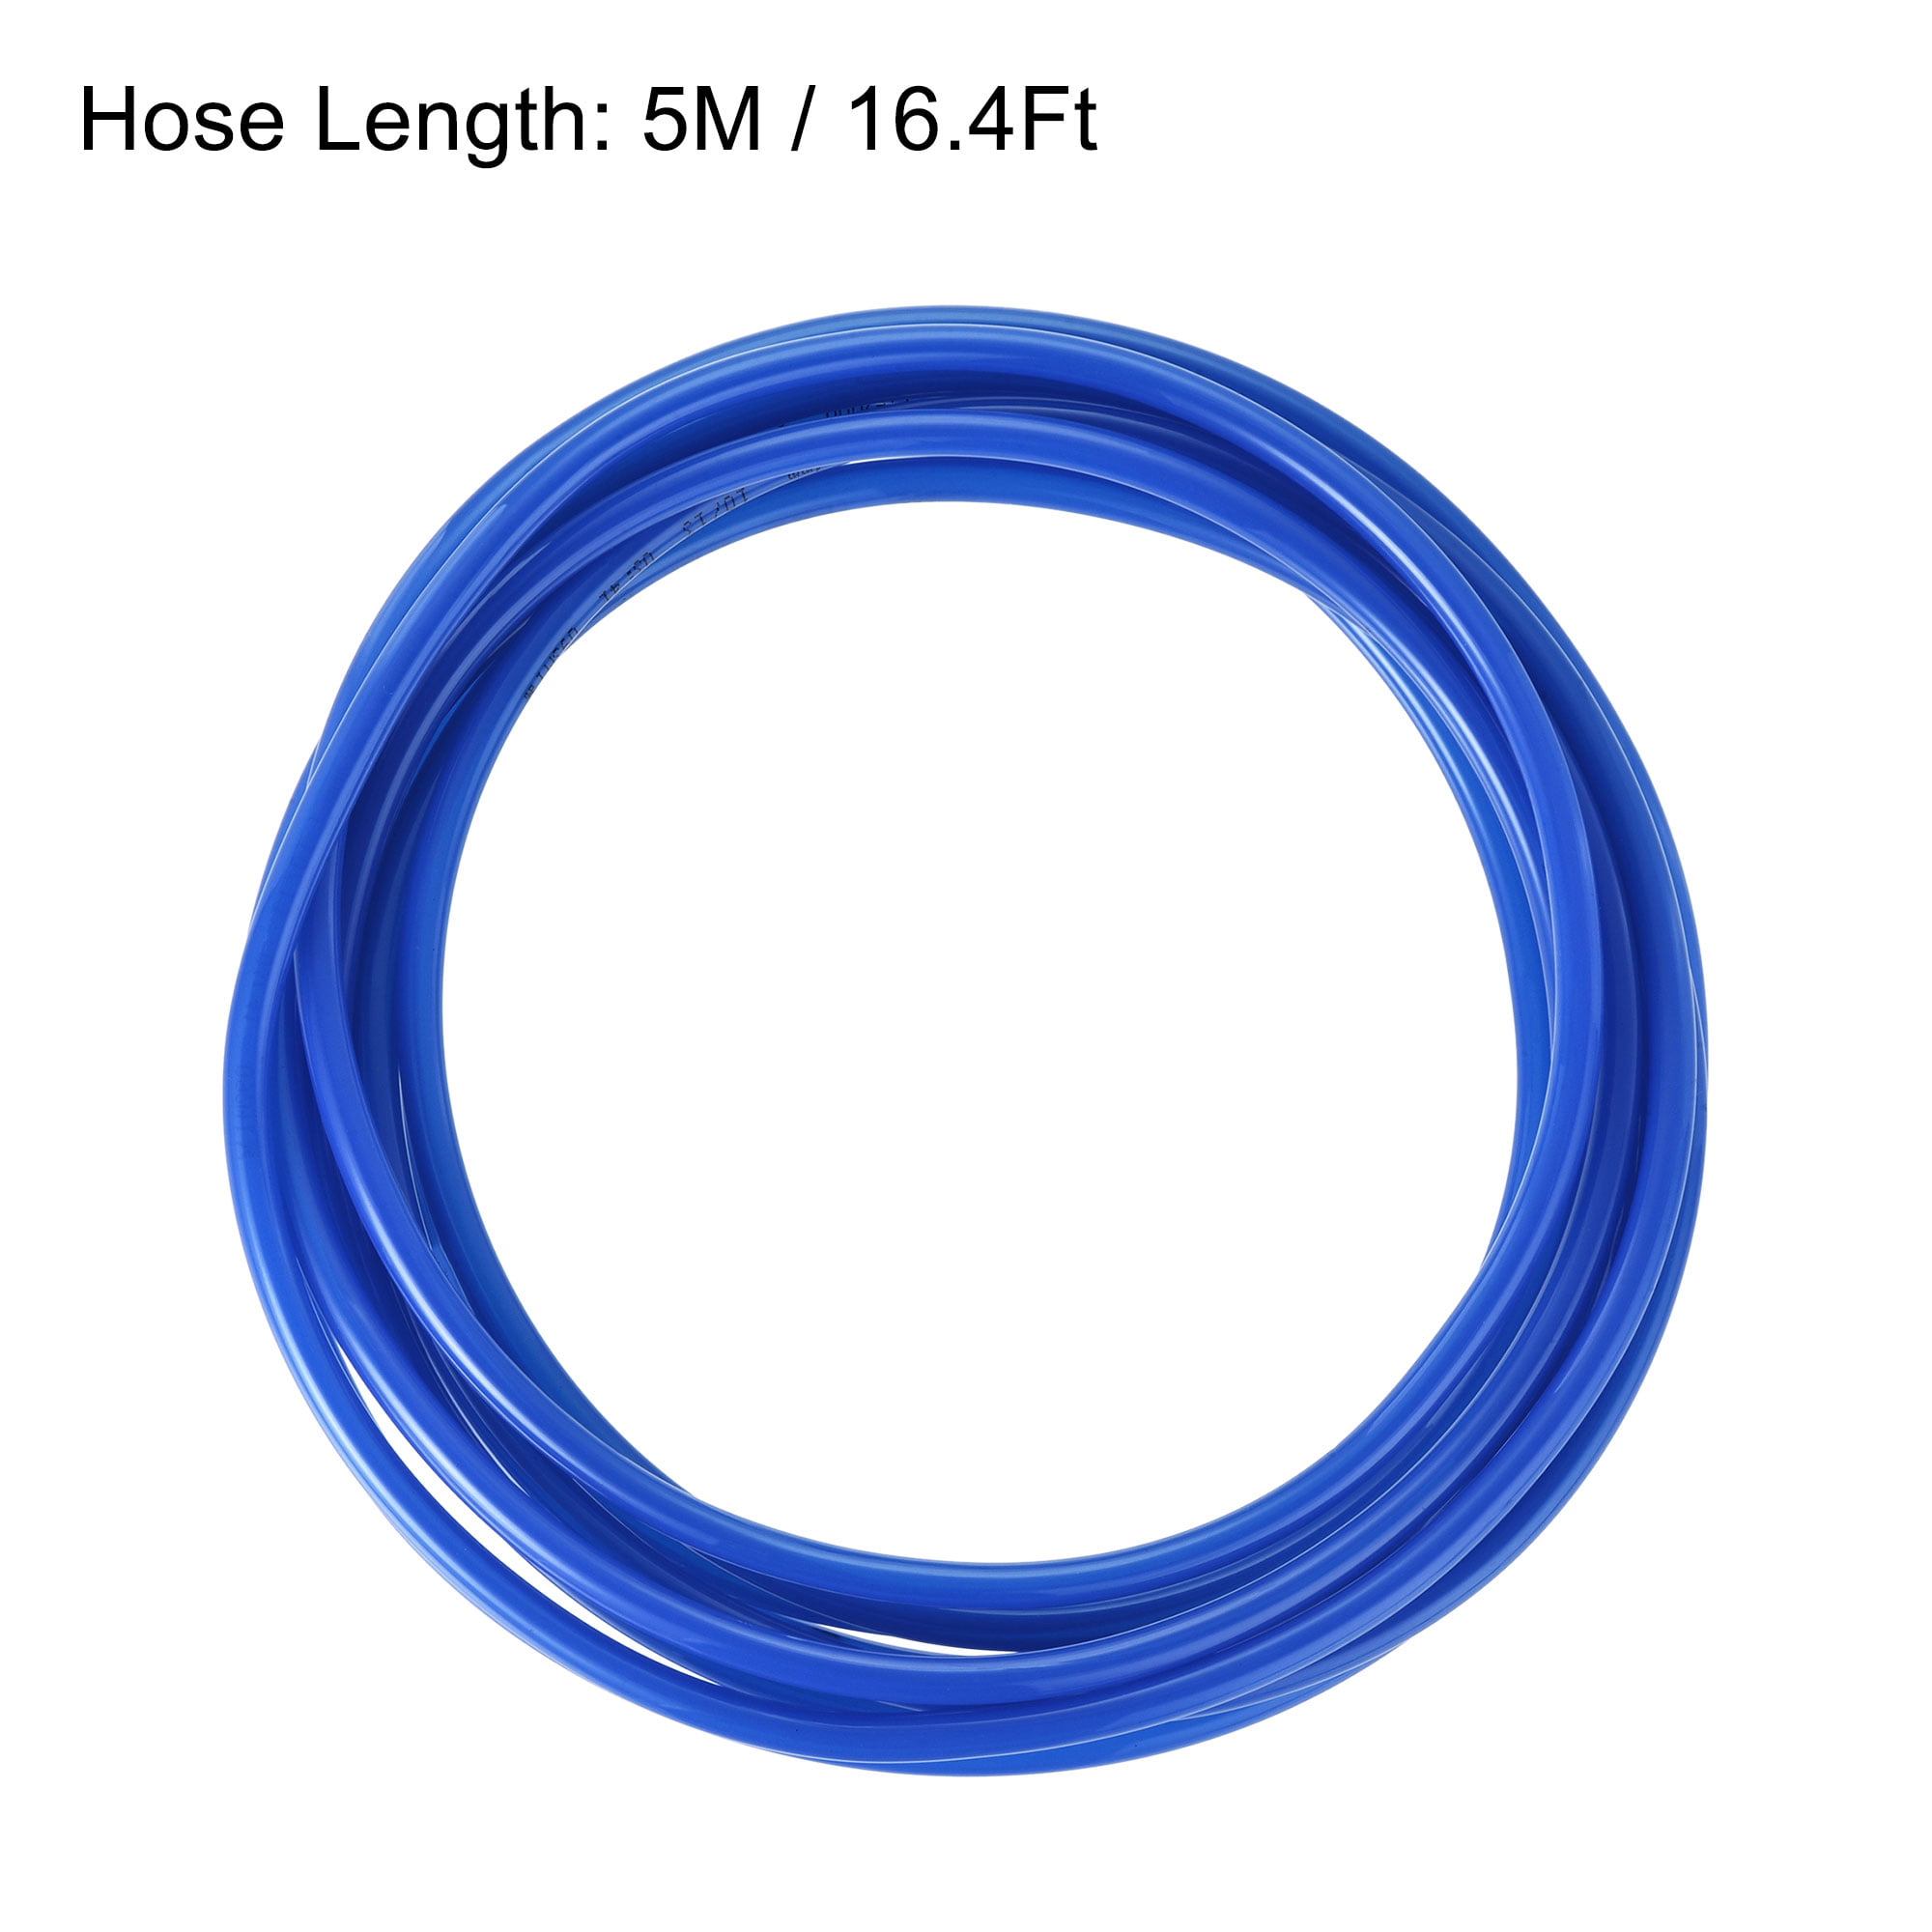 Pneumatic 6mm OD PU Air Hose Pipe Tube Kit 5M Blue with Push to Connect Fittings 752374987196 